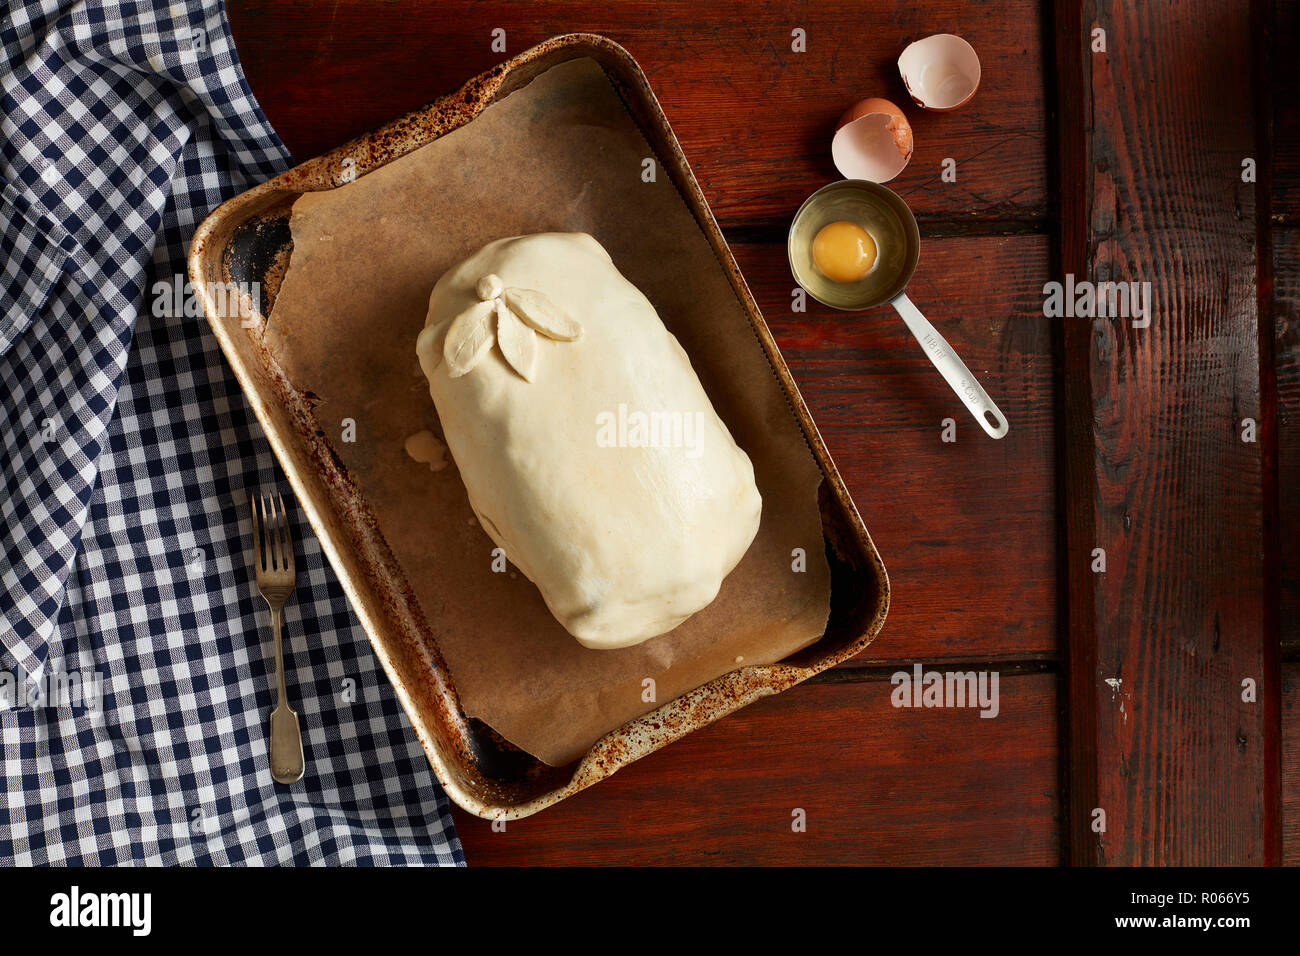 Lamb with plums in pastry Stock Photo